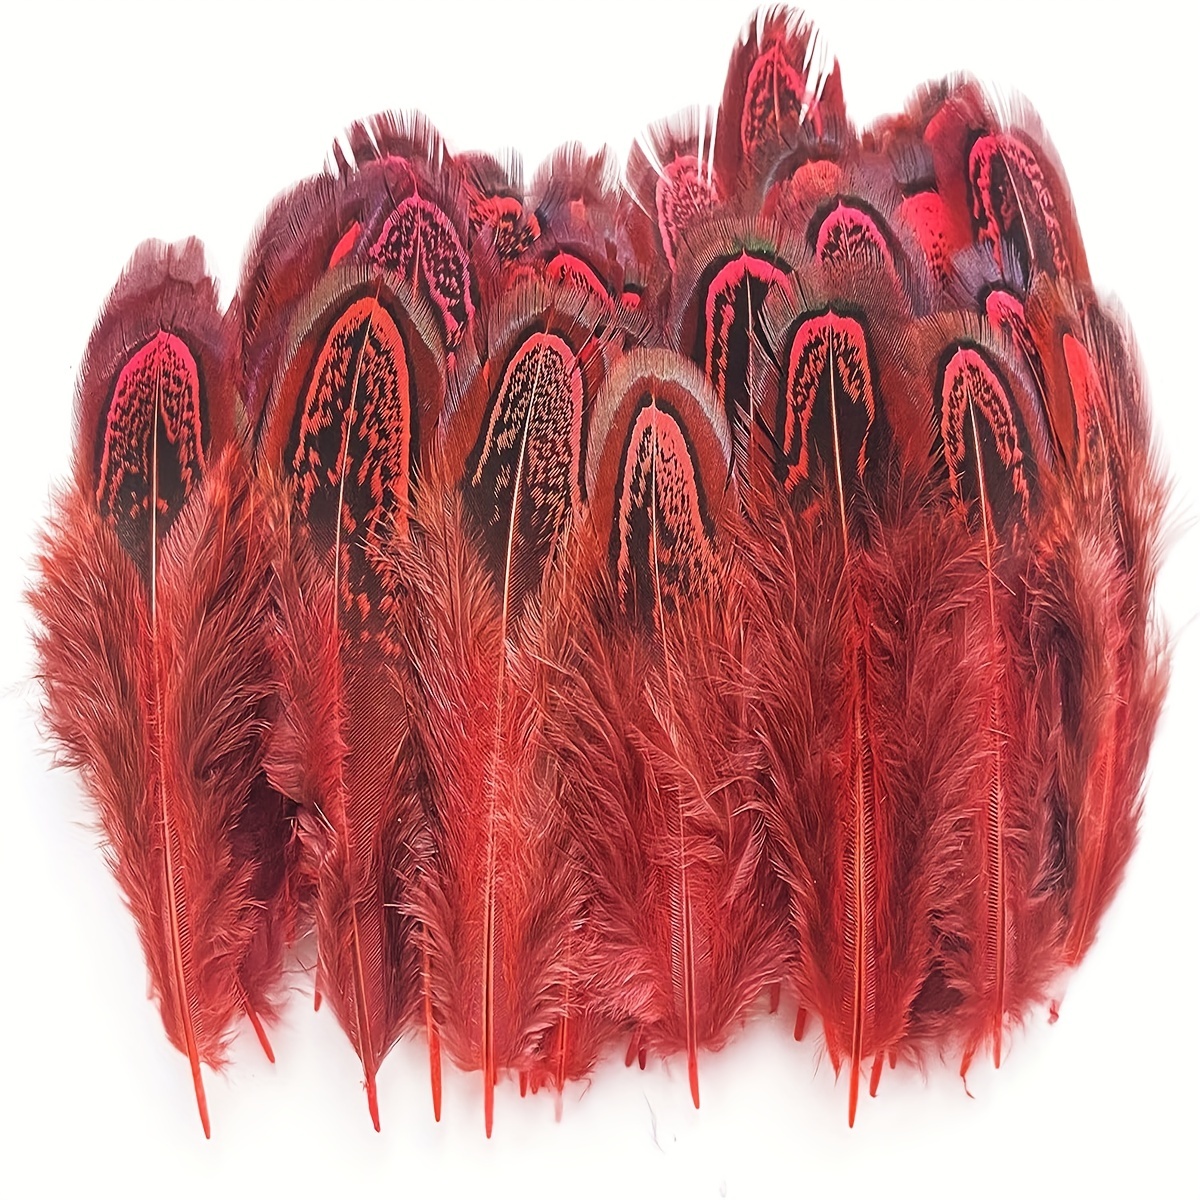 100pcs Brown Goose Feathers 6-8 inch for Crafts Wedding Party Decorations Clothing Hats Accessories Dream Catchers Making